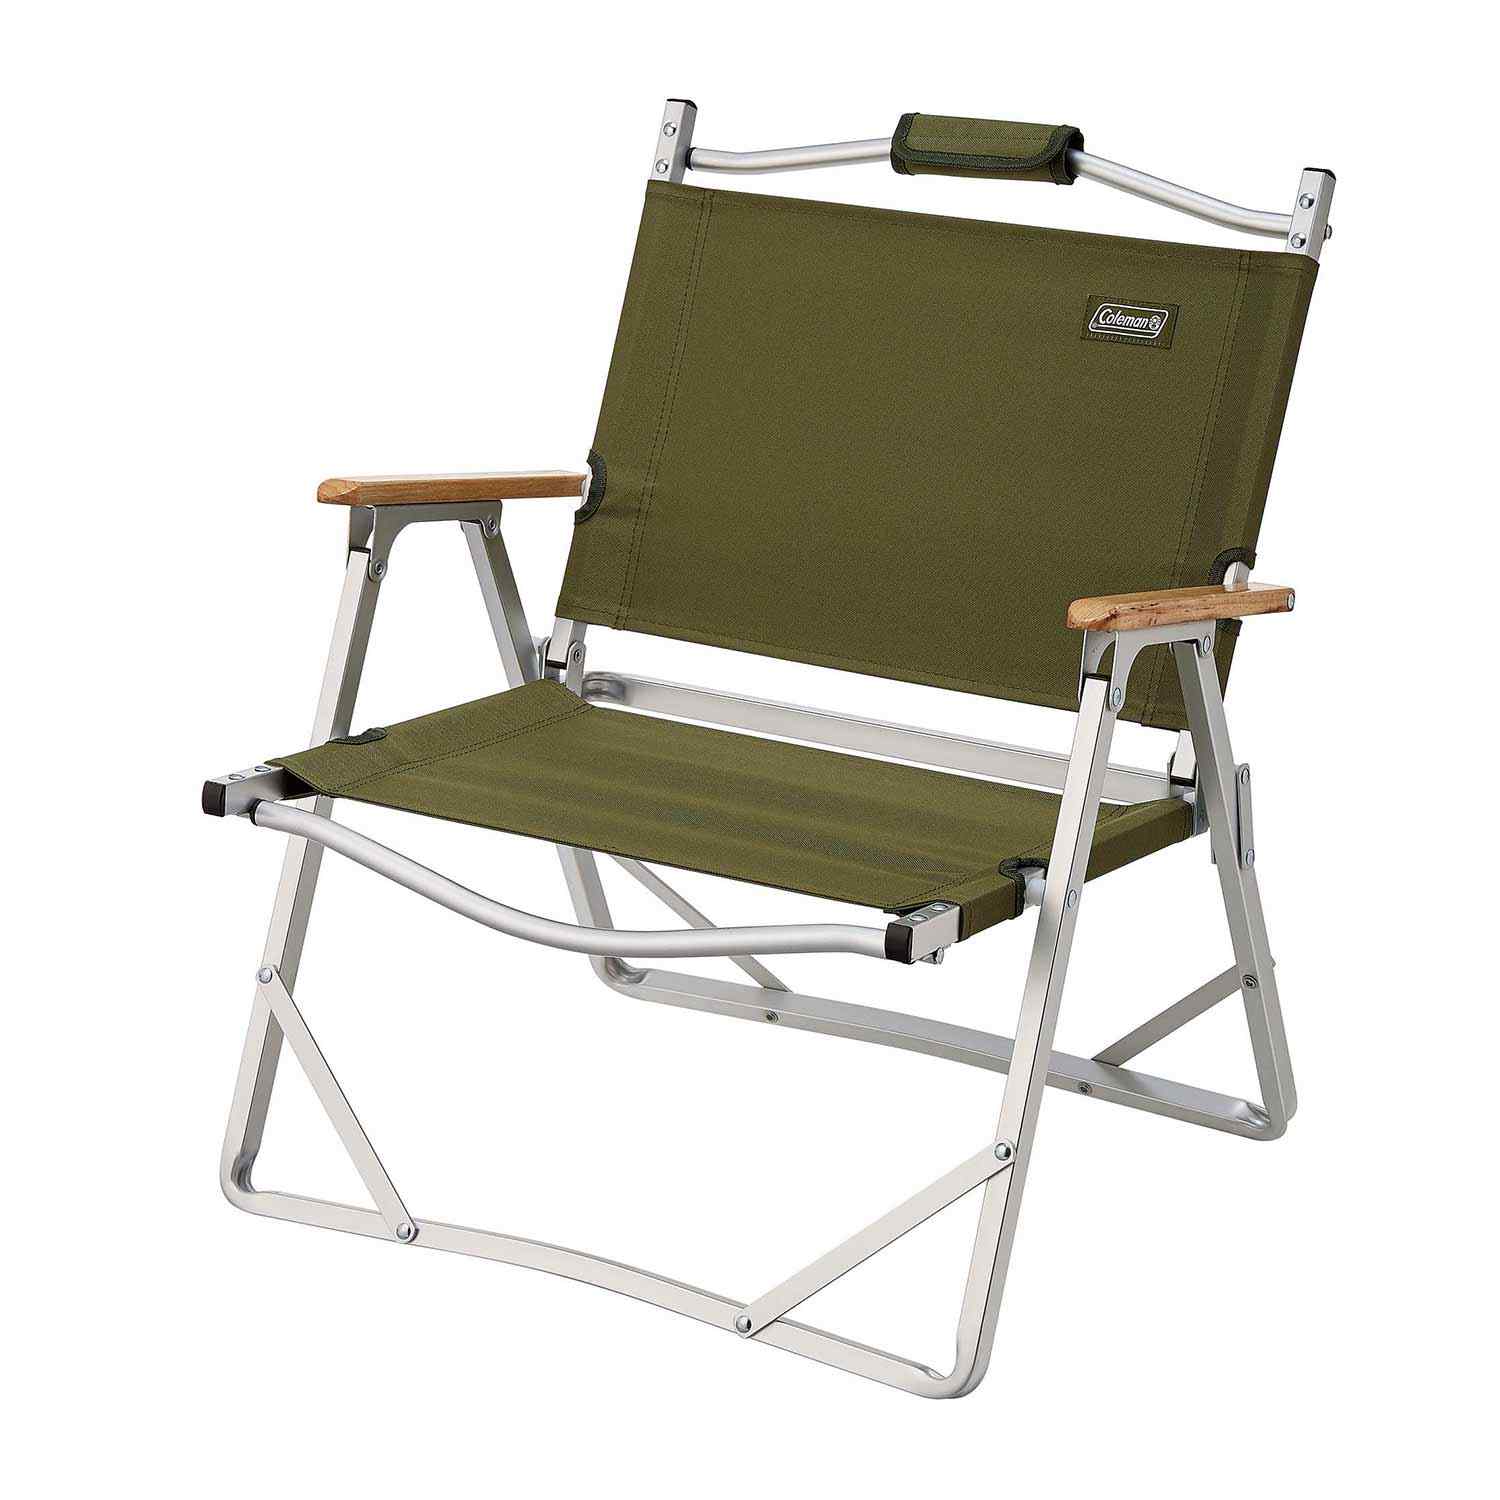 COLEMAN COMPACT FOLDING CHAIR OLIVE